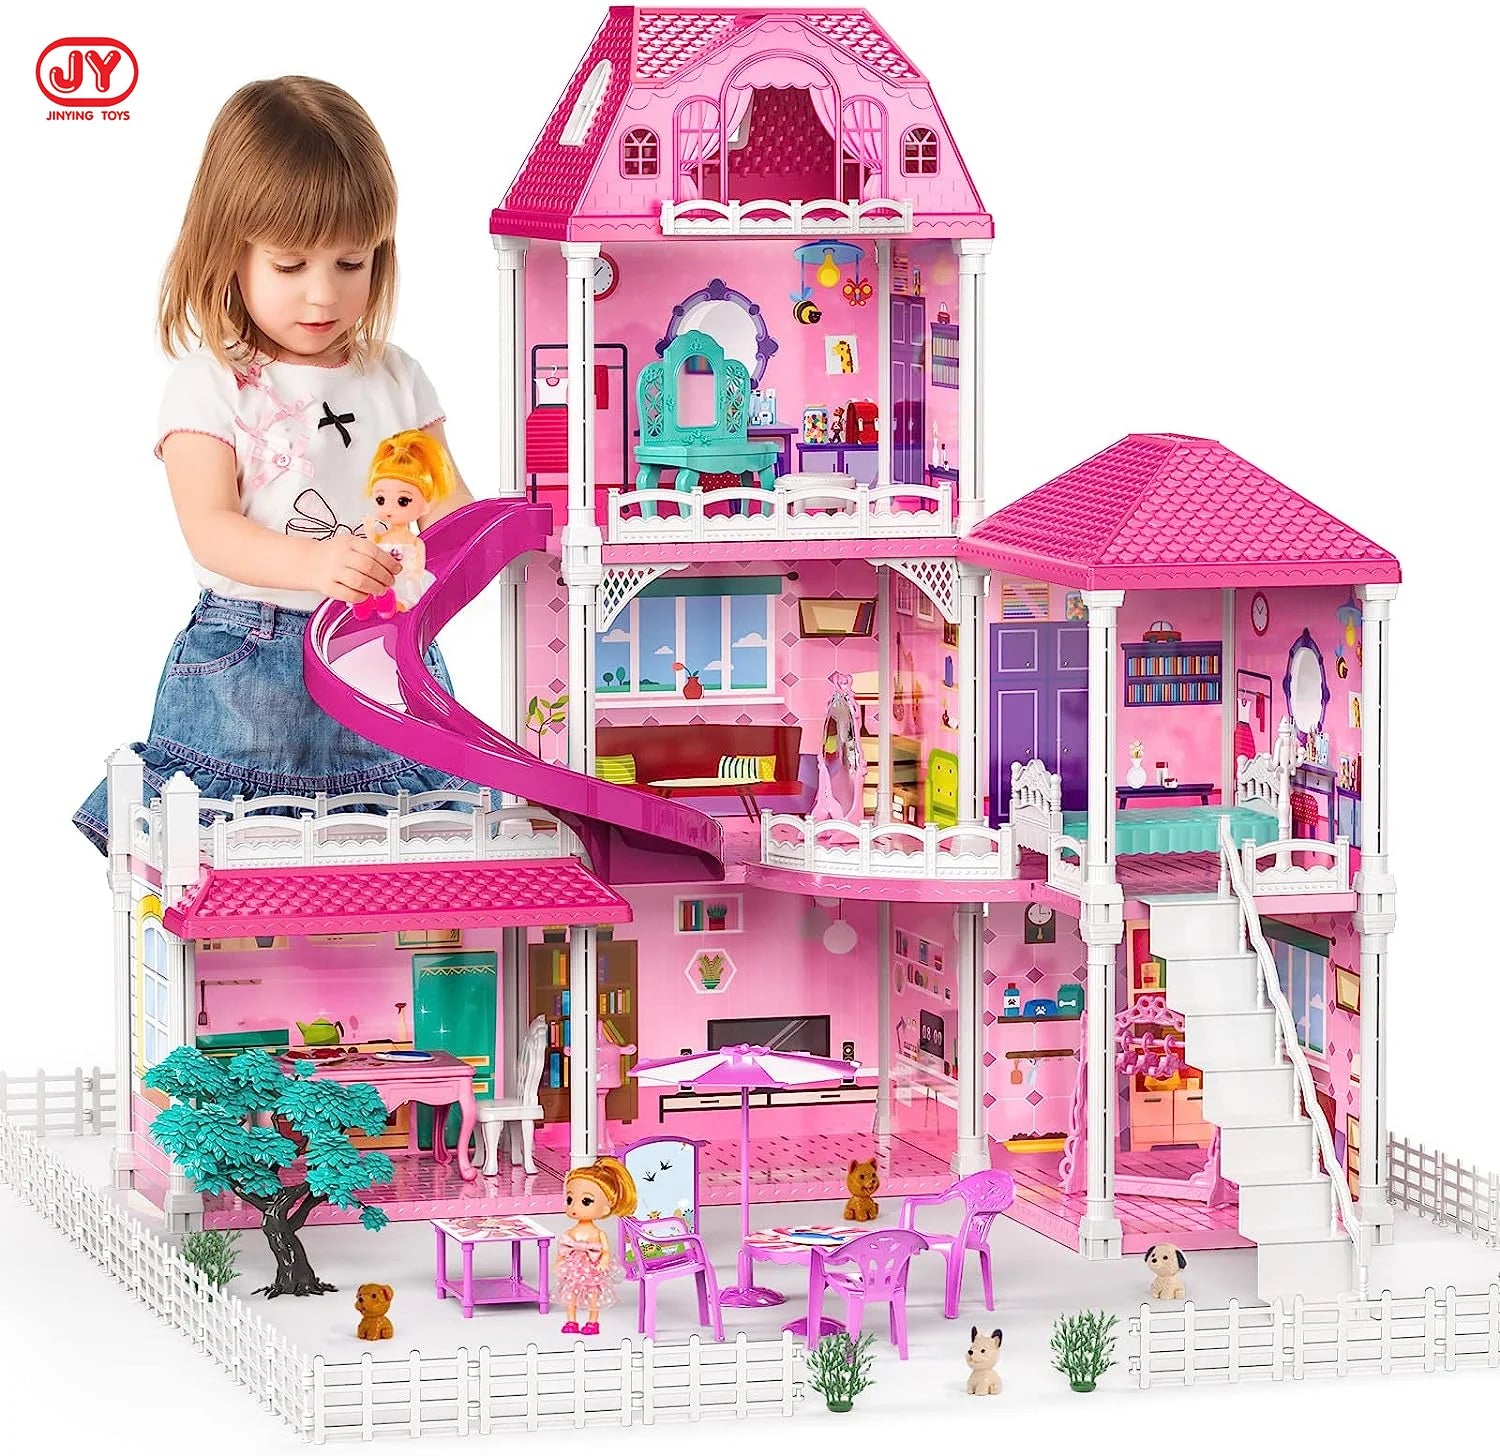 Doll House Toddler Toys for 3 4 5 6 Years Old for Girls 3-Story 6 Rooms Play house with 2 Dolls Toy Figures Dream House